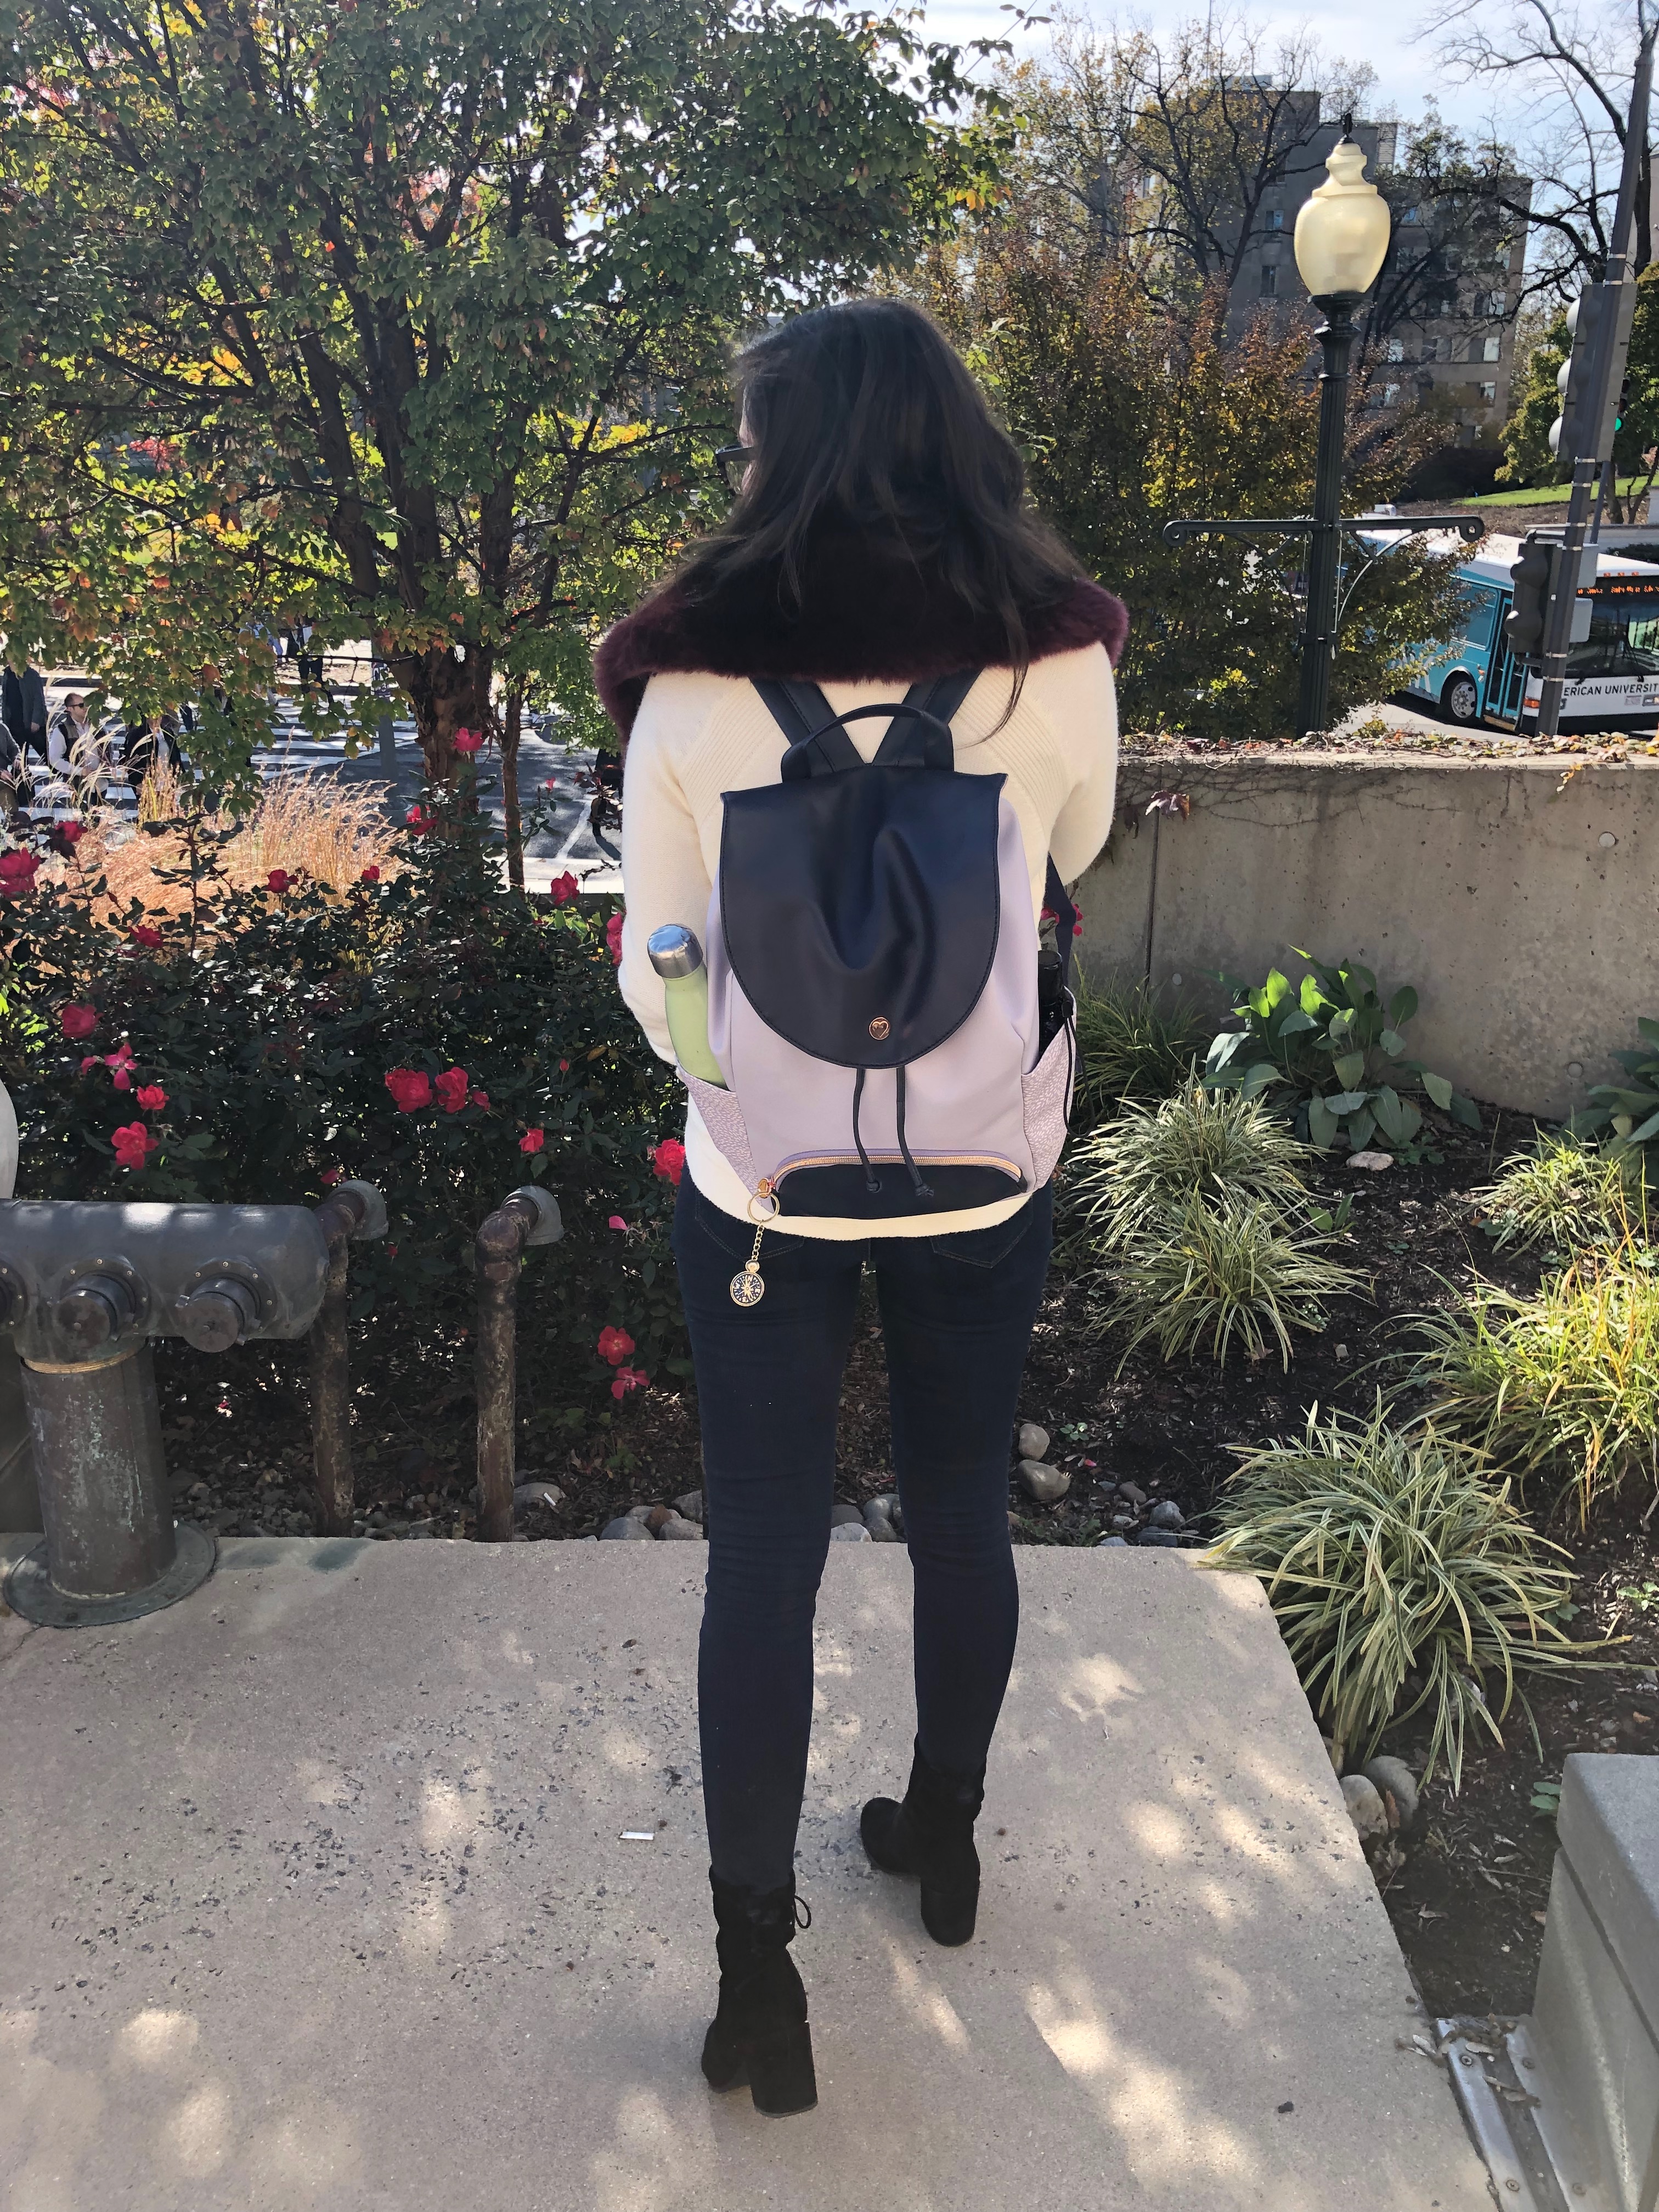 Turtleneck Weather and My New Bag